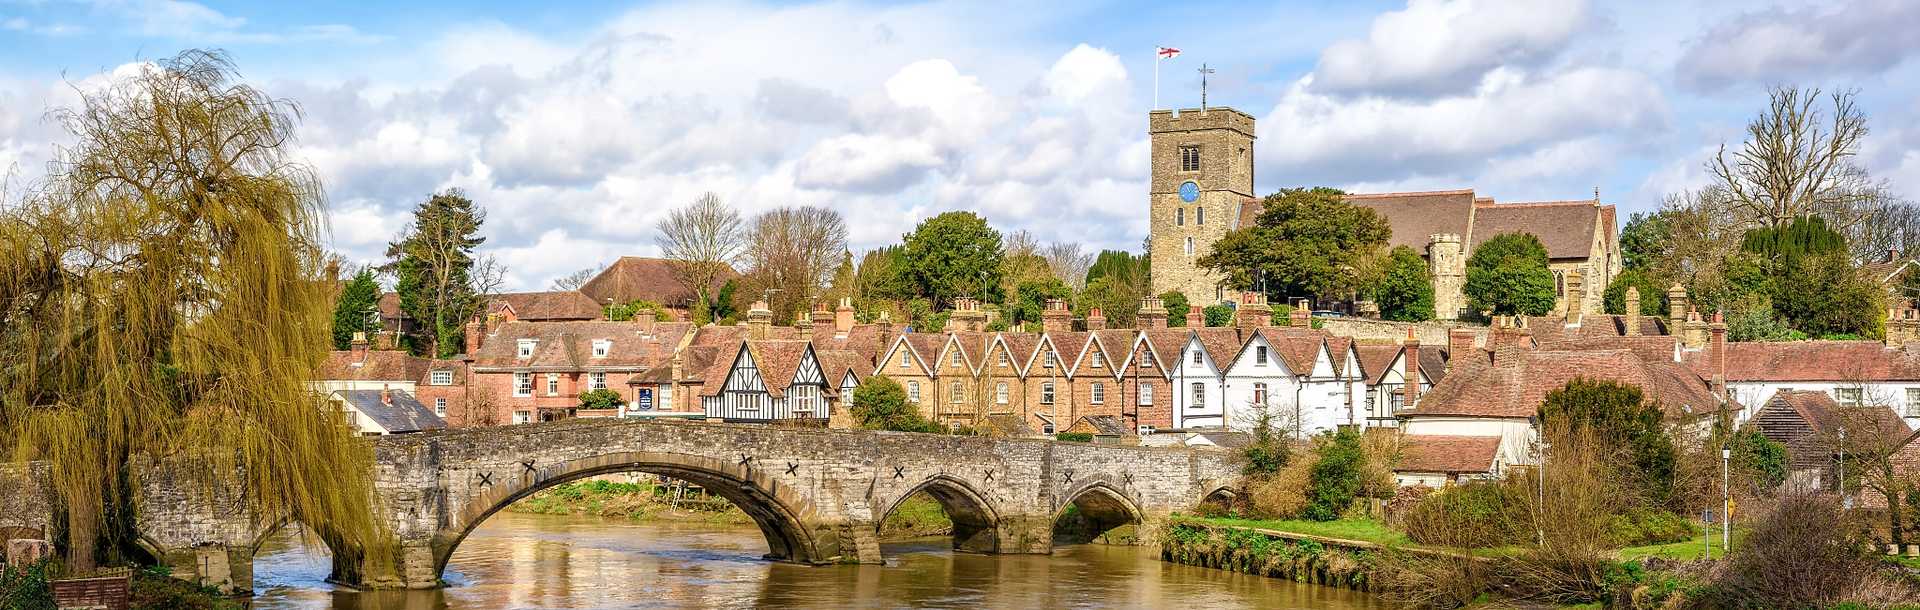 Aylesford Village on the River Medway in Kent, England